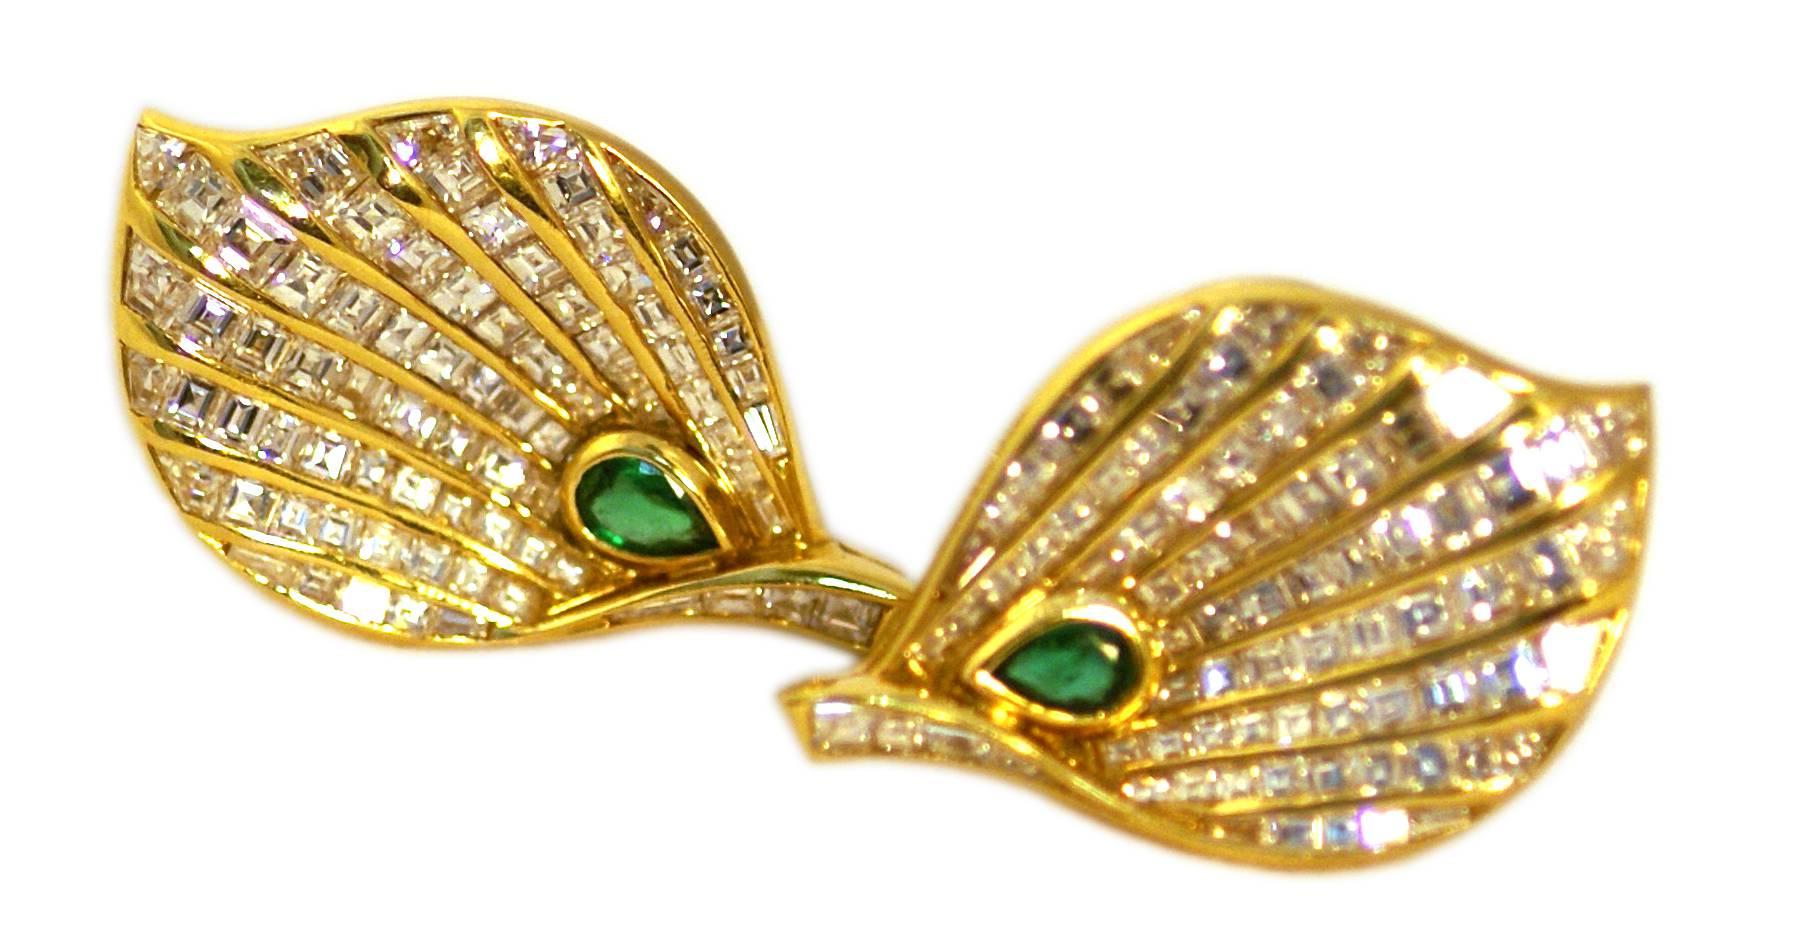 A pair of articulated diamond and emerald leaf design ear-clips by esteemed Turin jeweler Fasano, circa 1985.